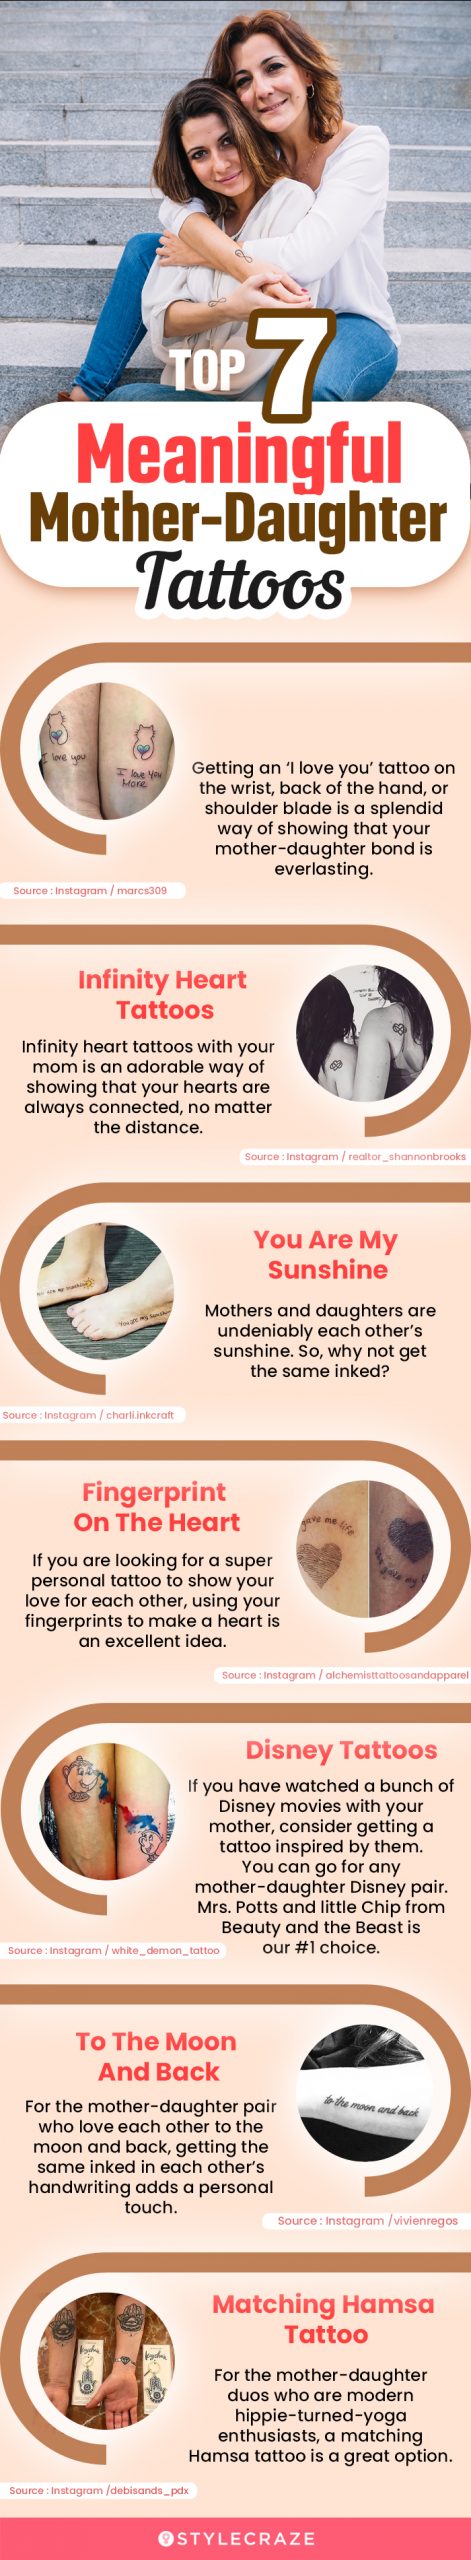 top 7 meaningful motherdaughter tattoos(infographic)